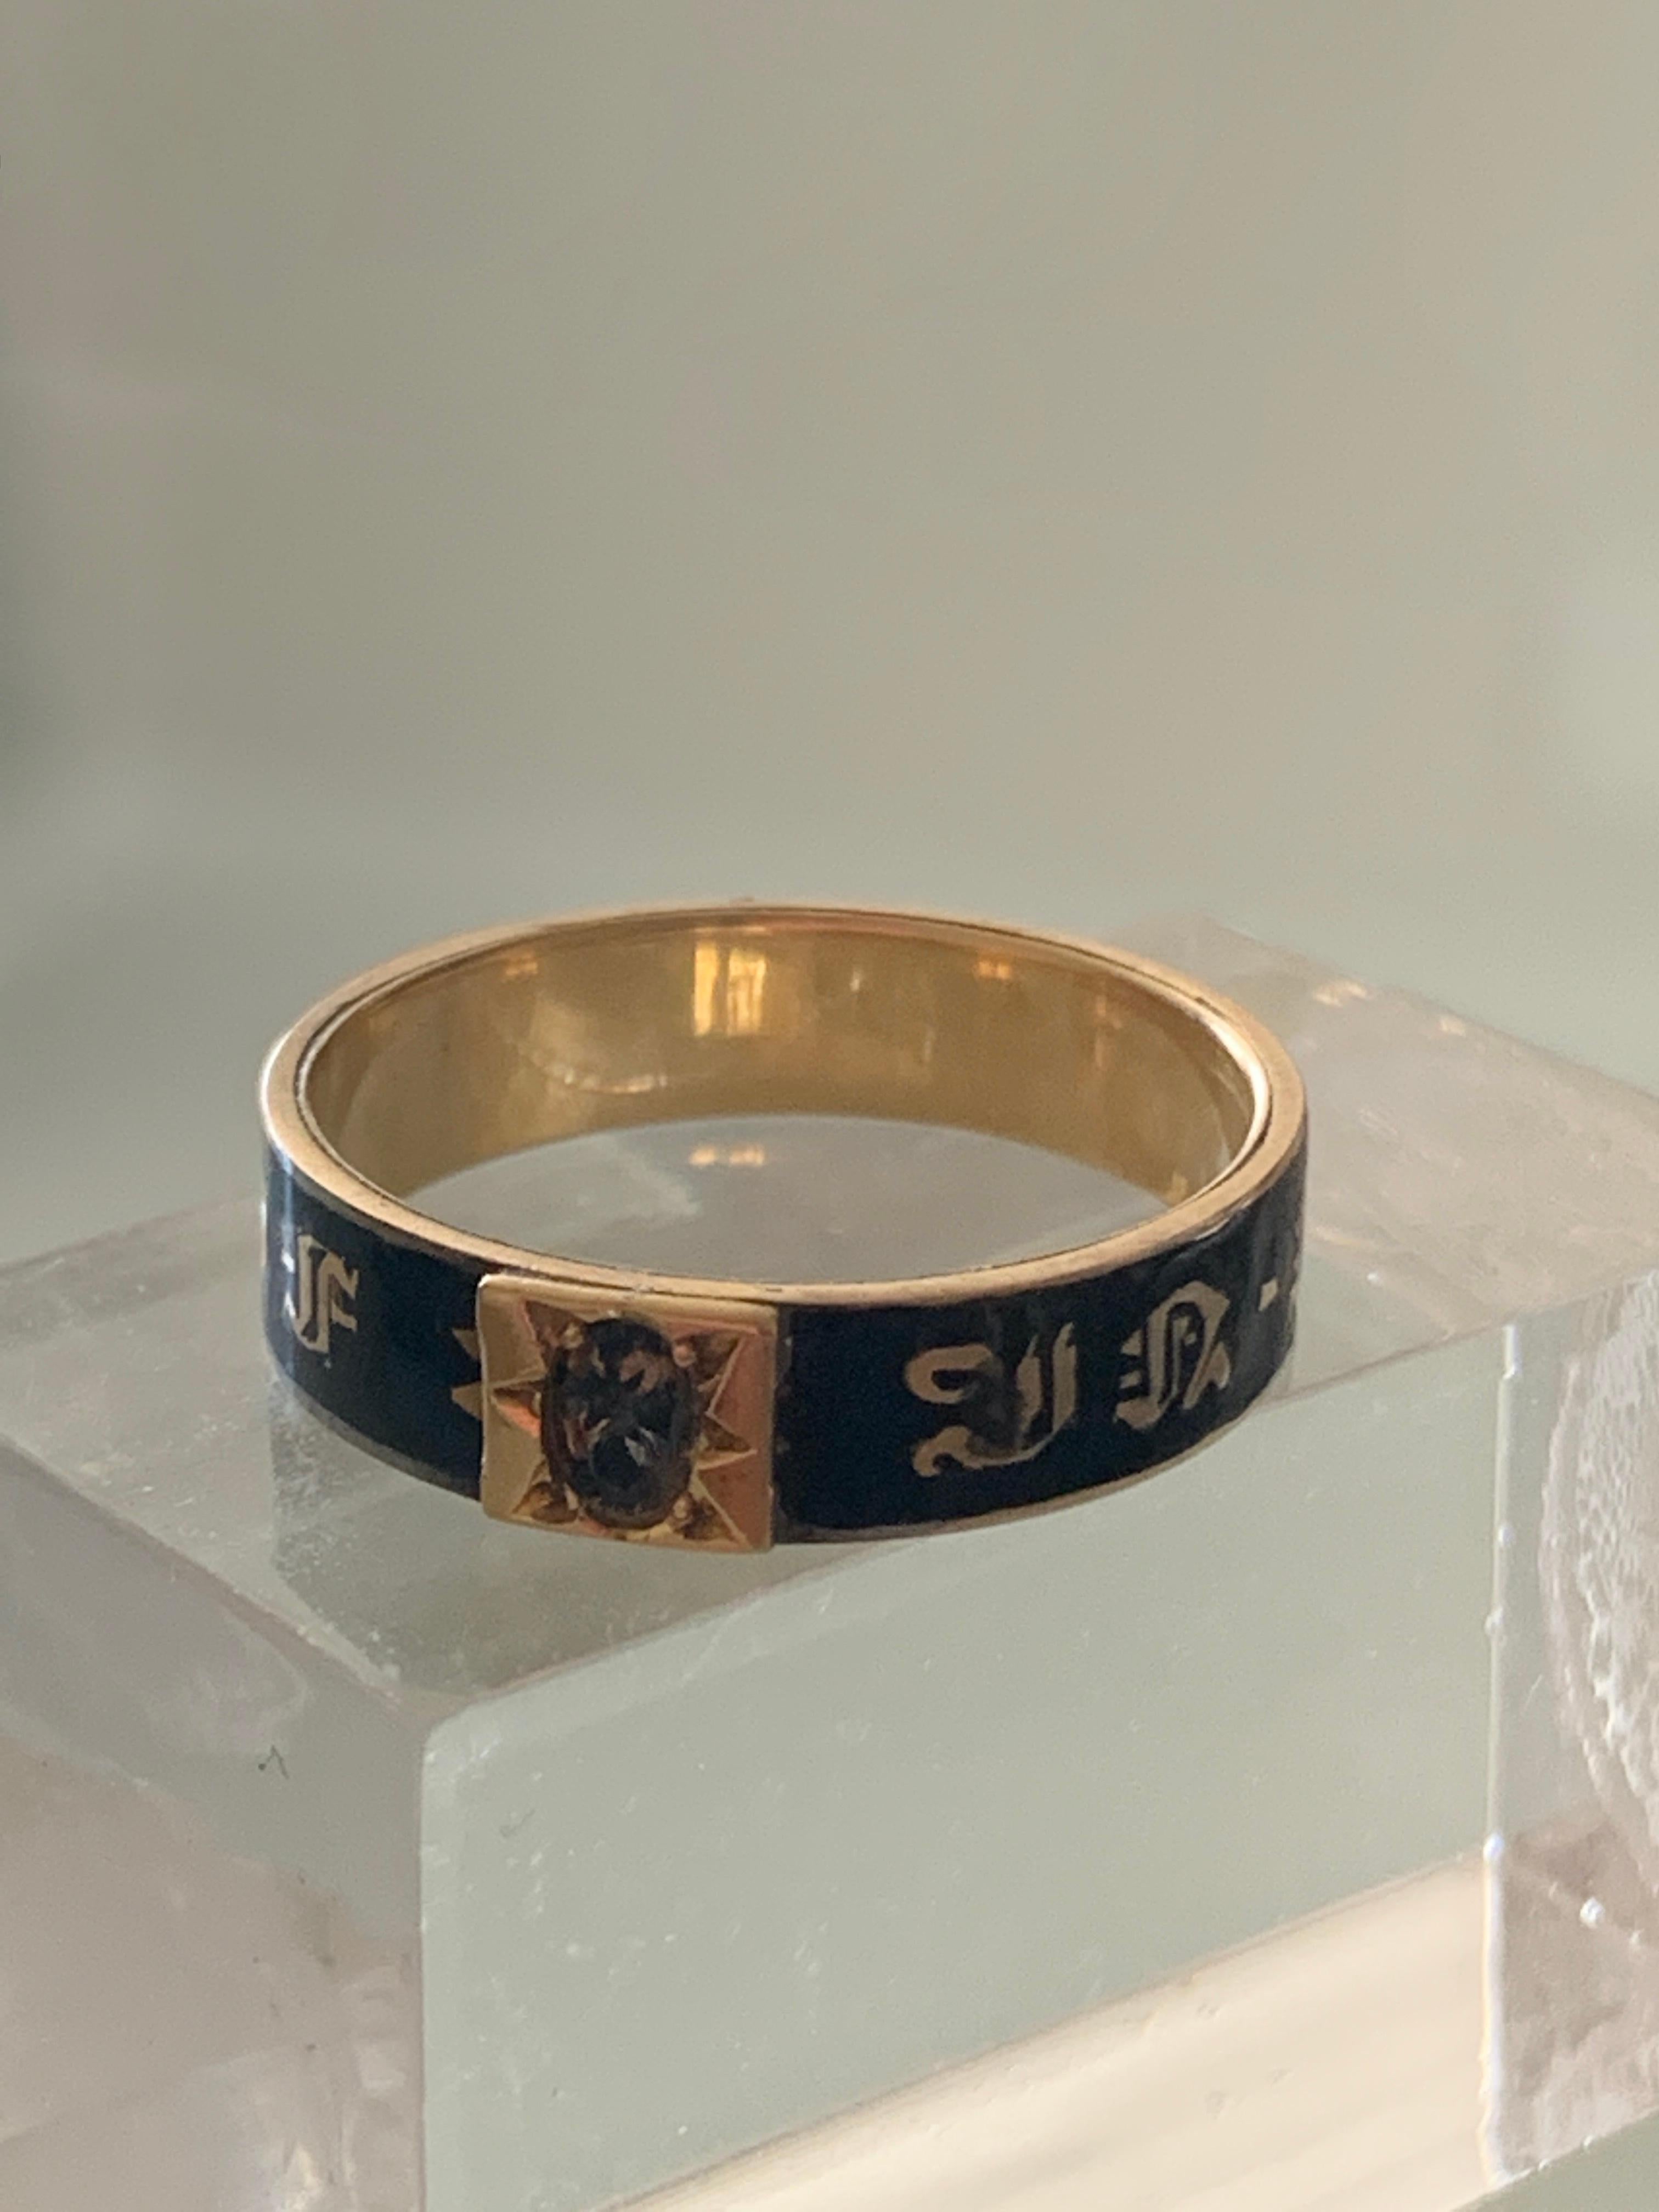 High Carat Gold Antique Memorial Ring

with surrounding black enamel and gold letters in-scripted :

